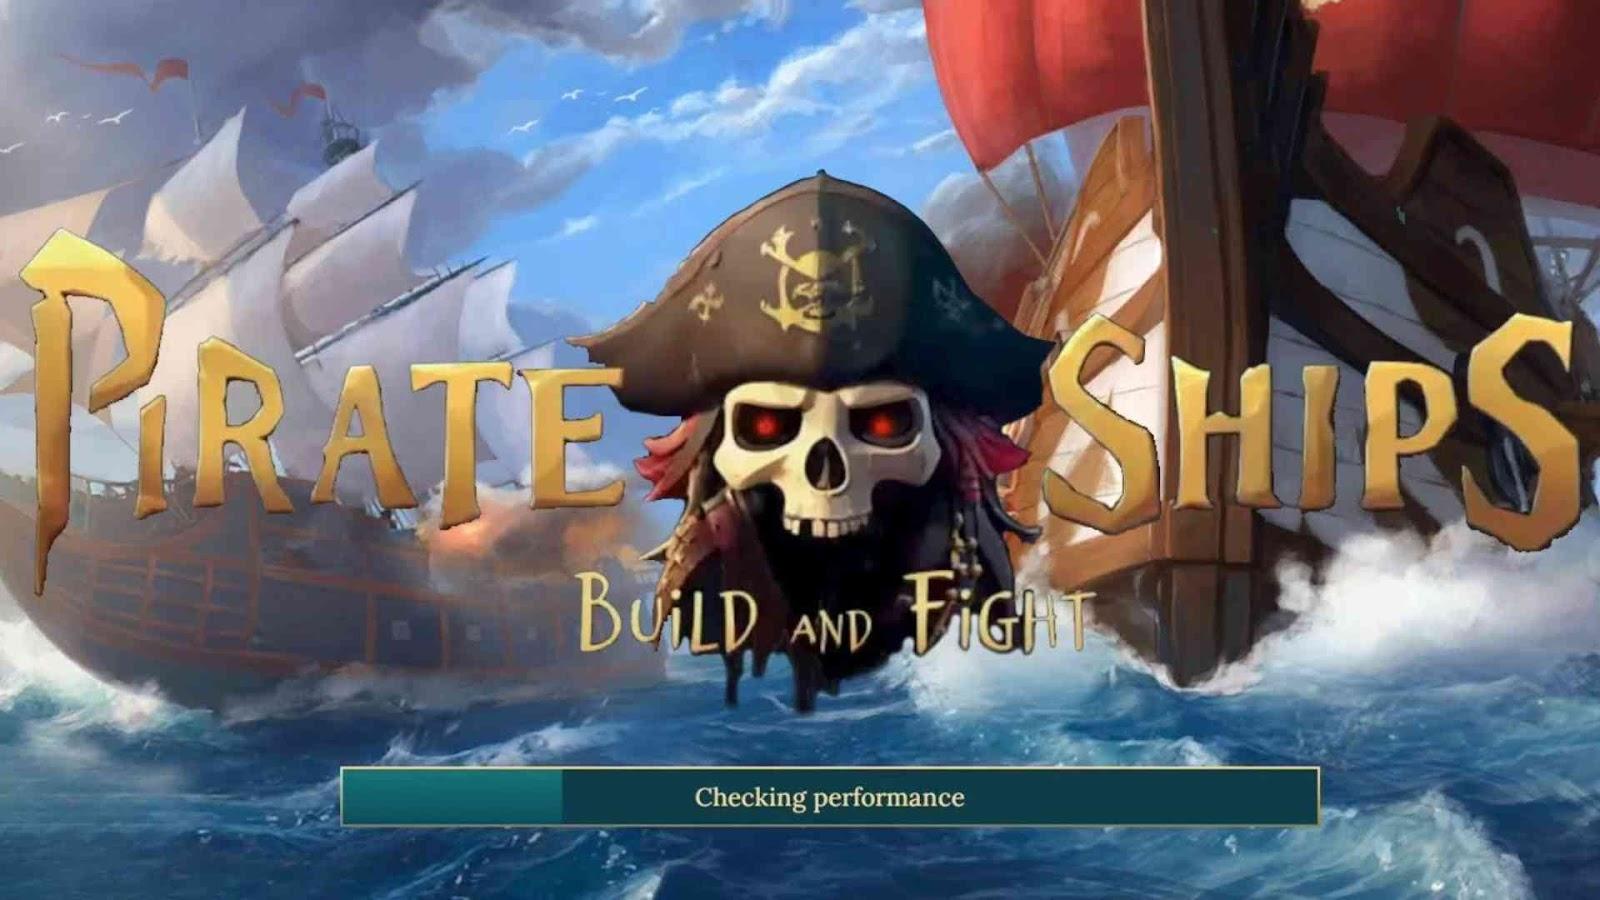 Pirate Ships・Build and Fight